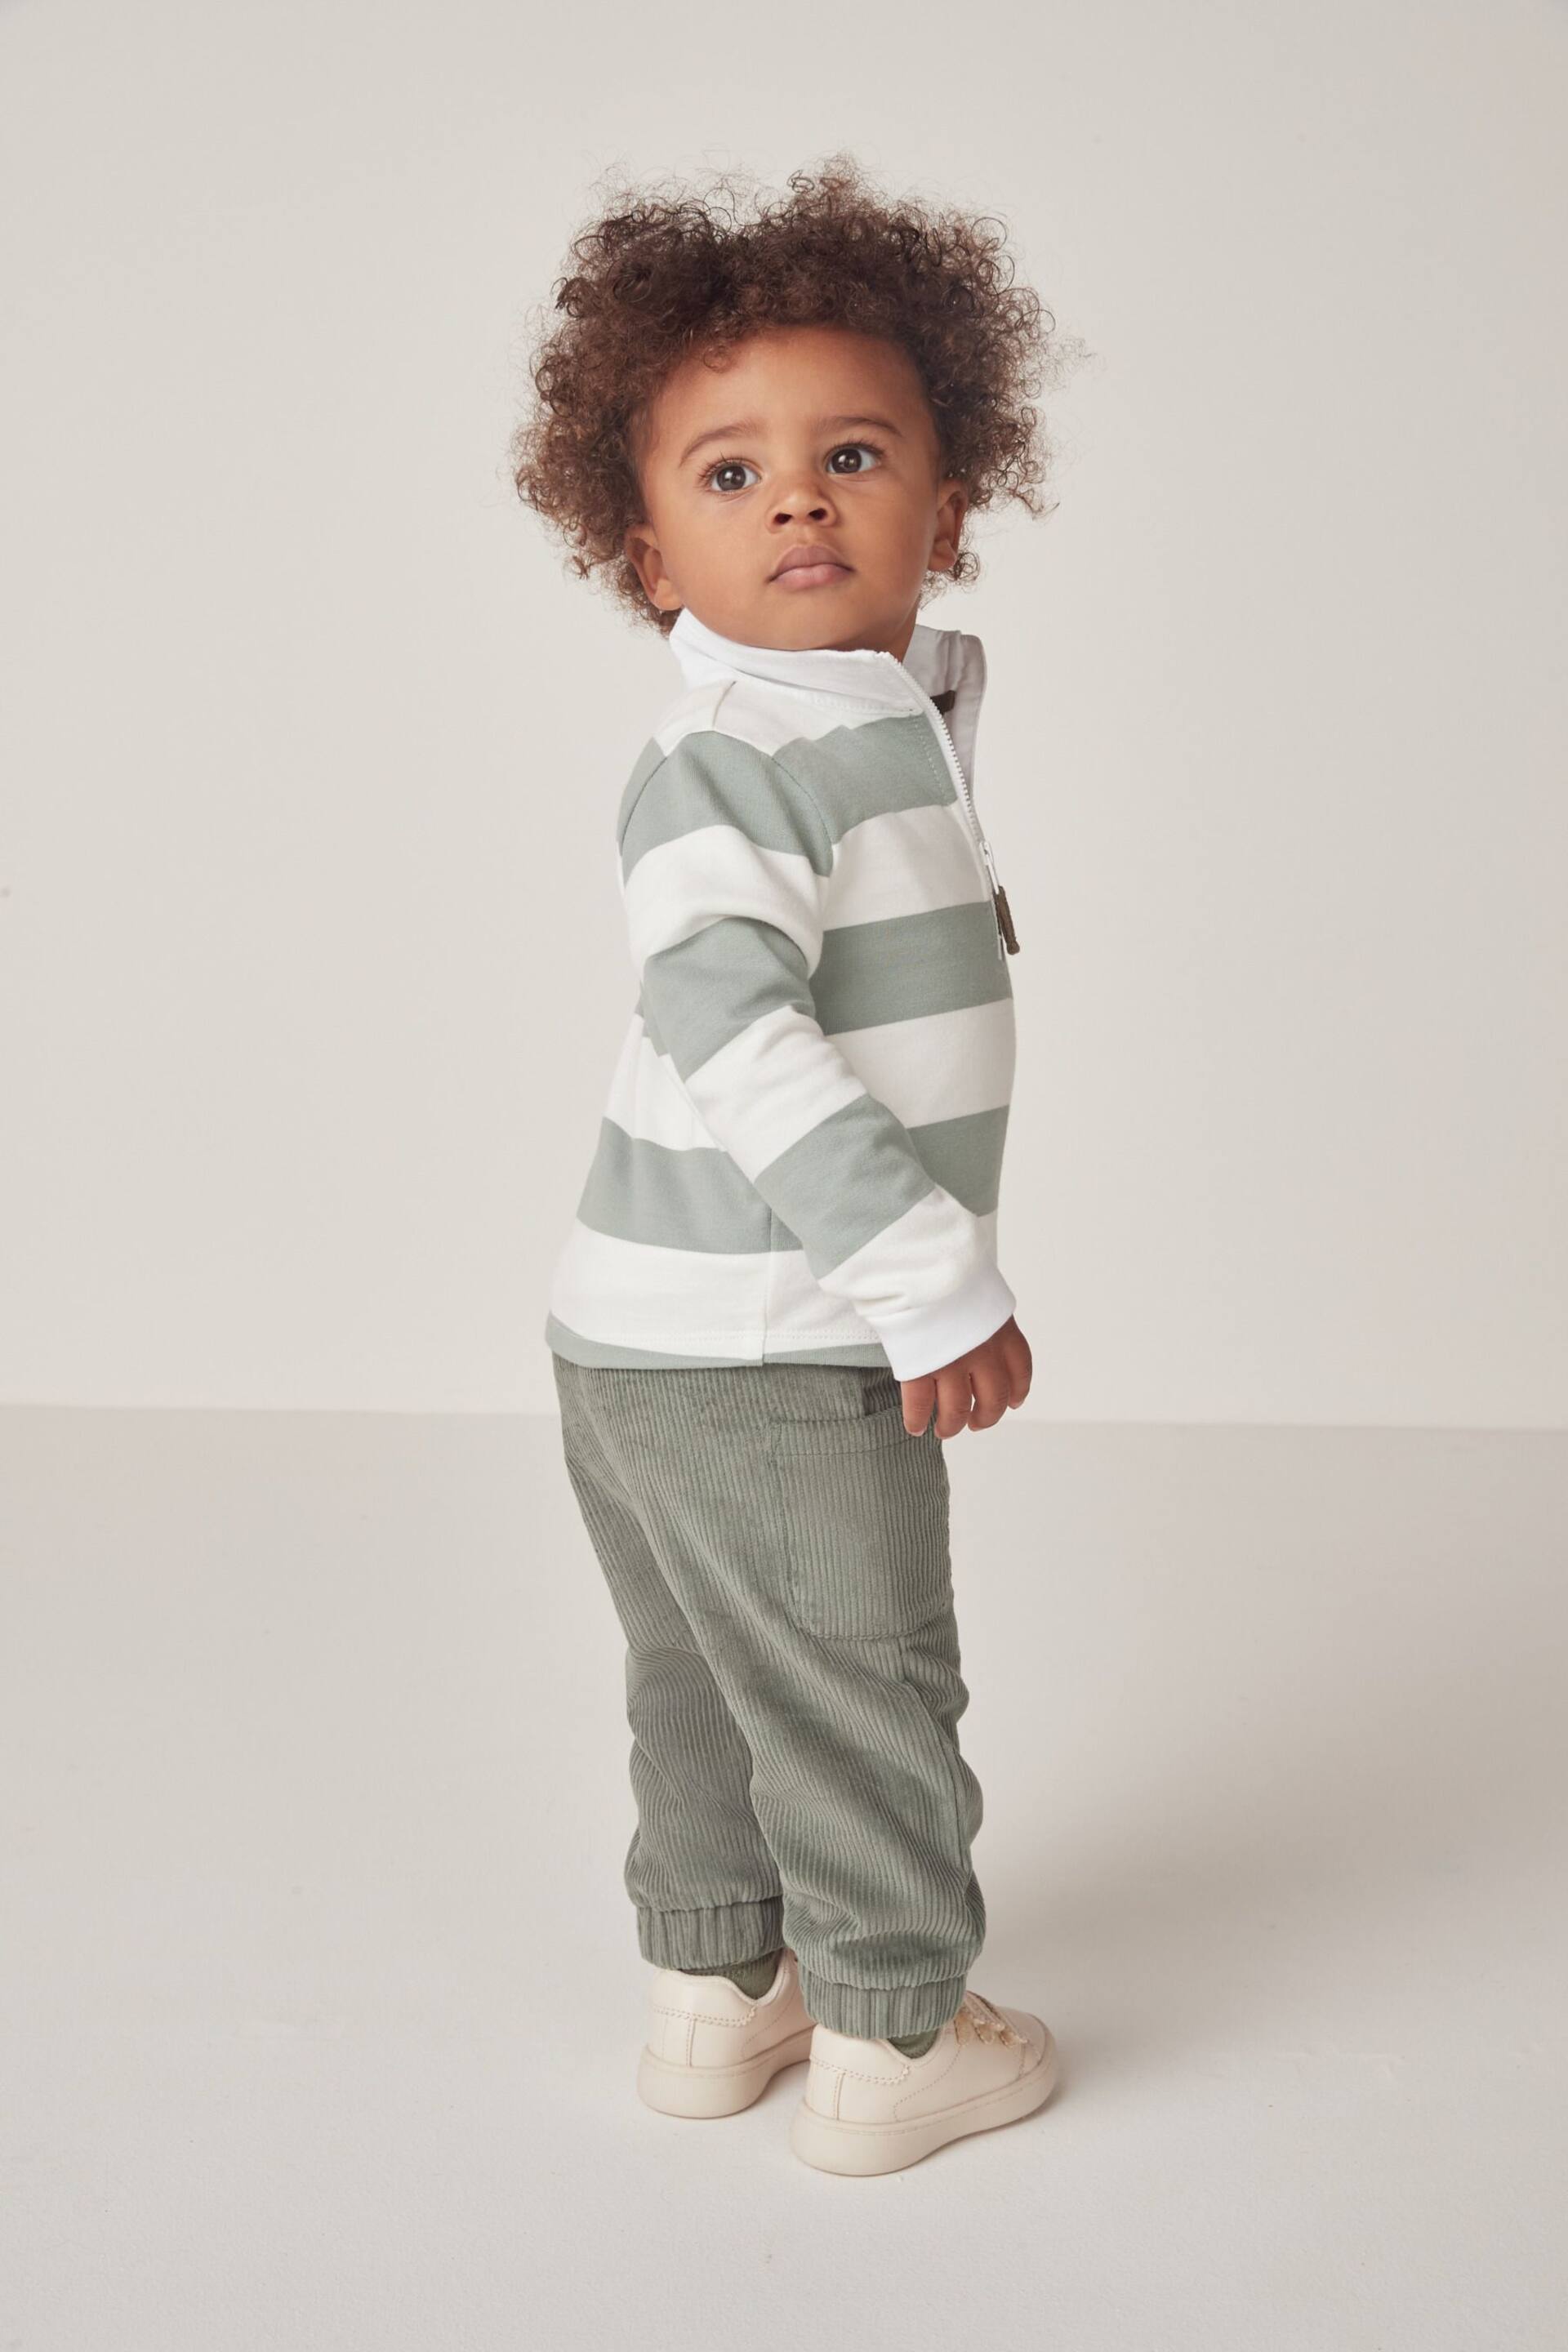 The White Company Green Organic Cotton Rugby Shirt & Cord Trouser Set - Image 2 of 10